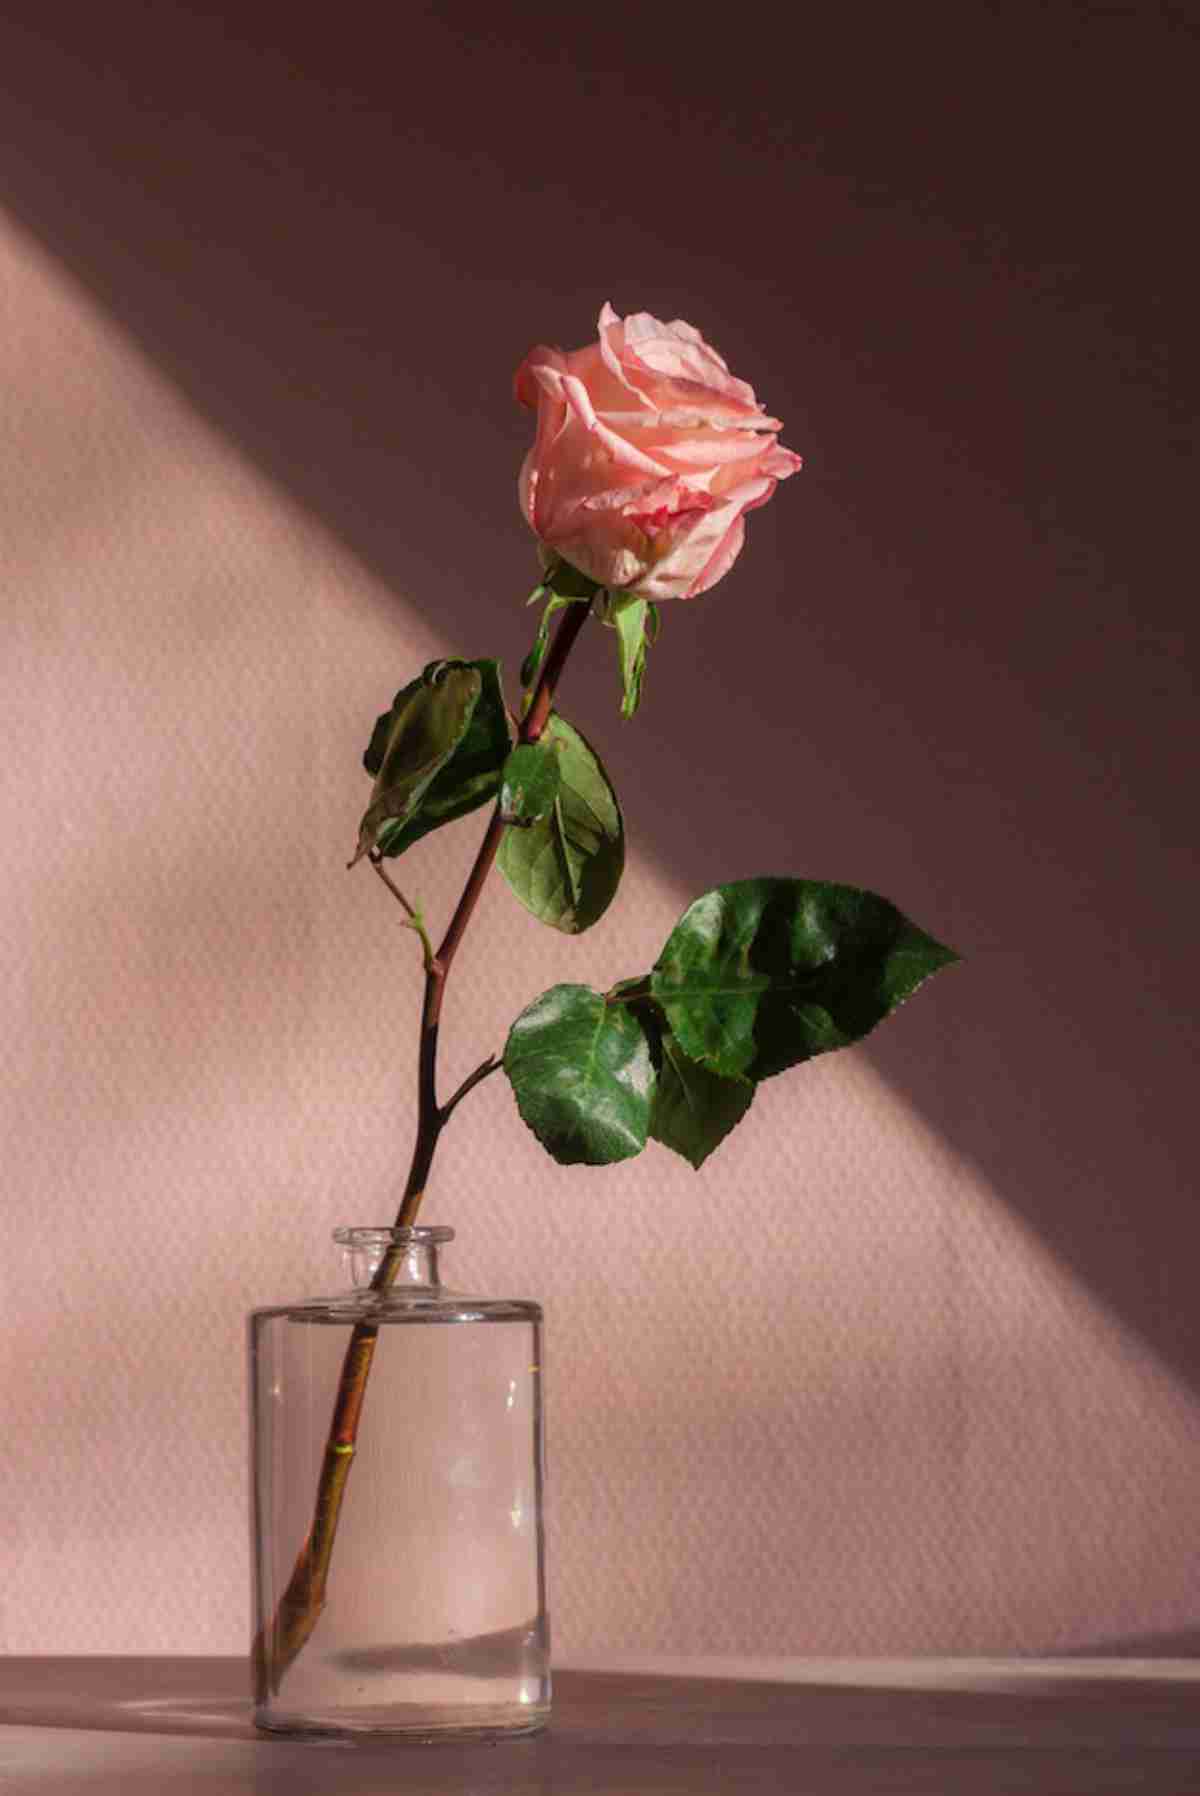 pink rose on a water glass | Easy Home Improvement Projects: Small Budget, Big Impact Upgrades